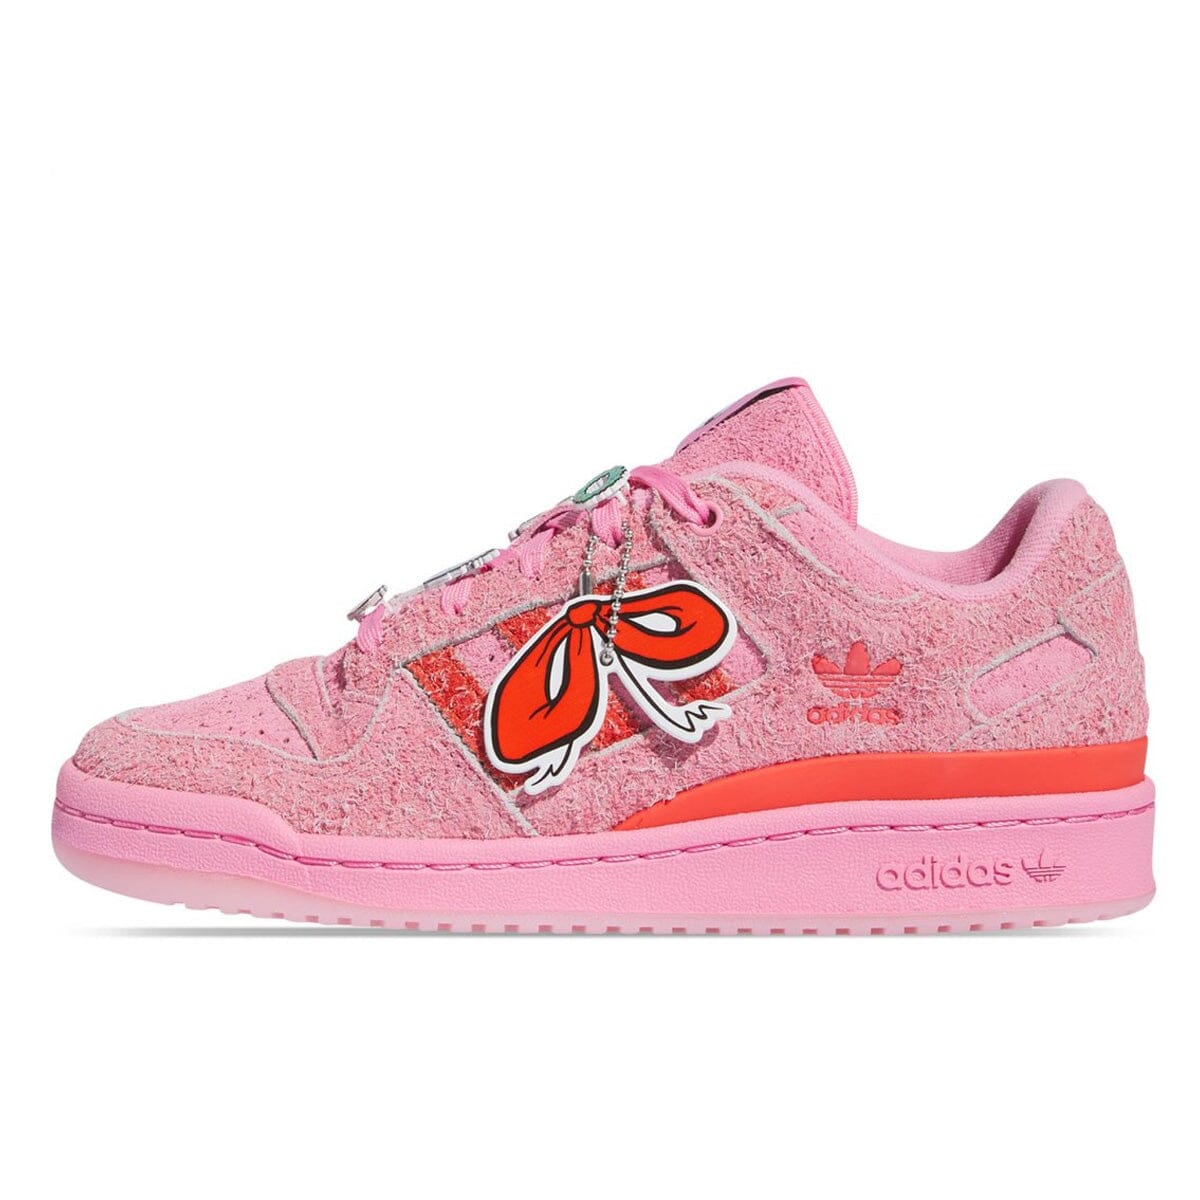 Adidas Forum Low The Grinch Cindy-Lou Who Pink Adidas Forum Blizz Sneakers 